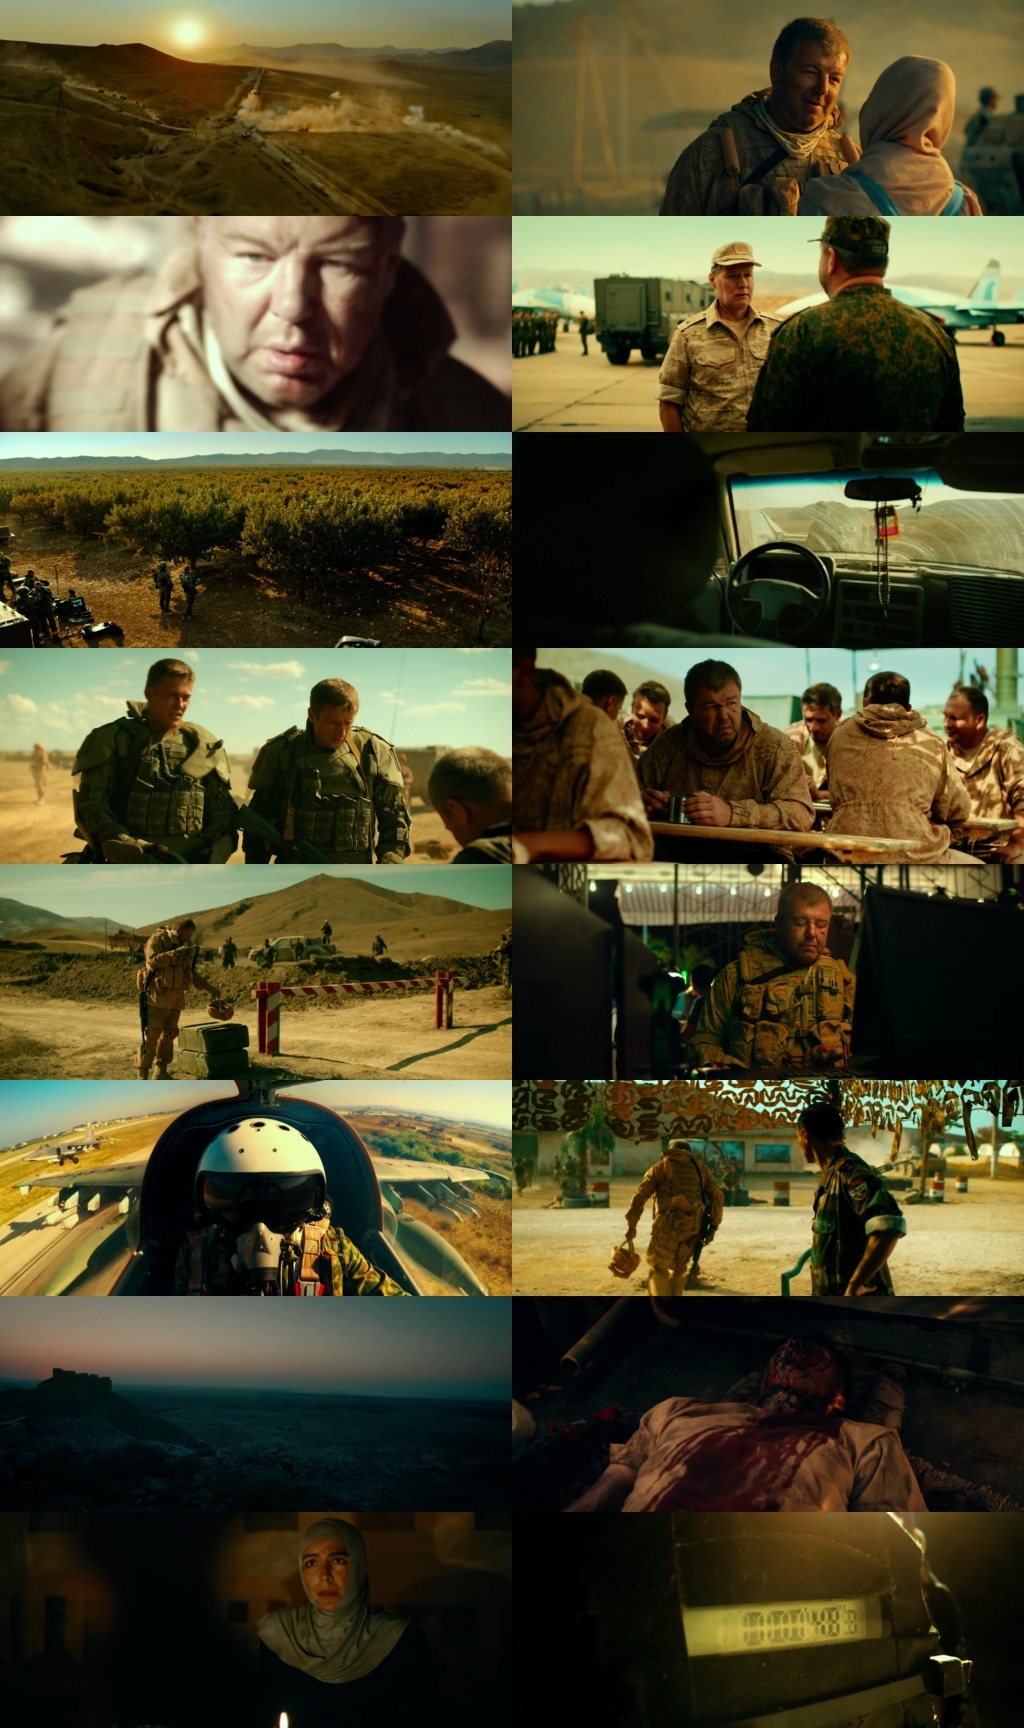 Once In the Desert 2022 Hindi Dual Audio 1080p 720p 480p Web-DL ESubs HEVC